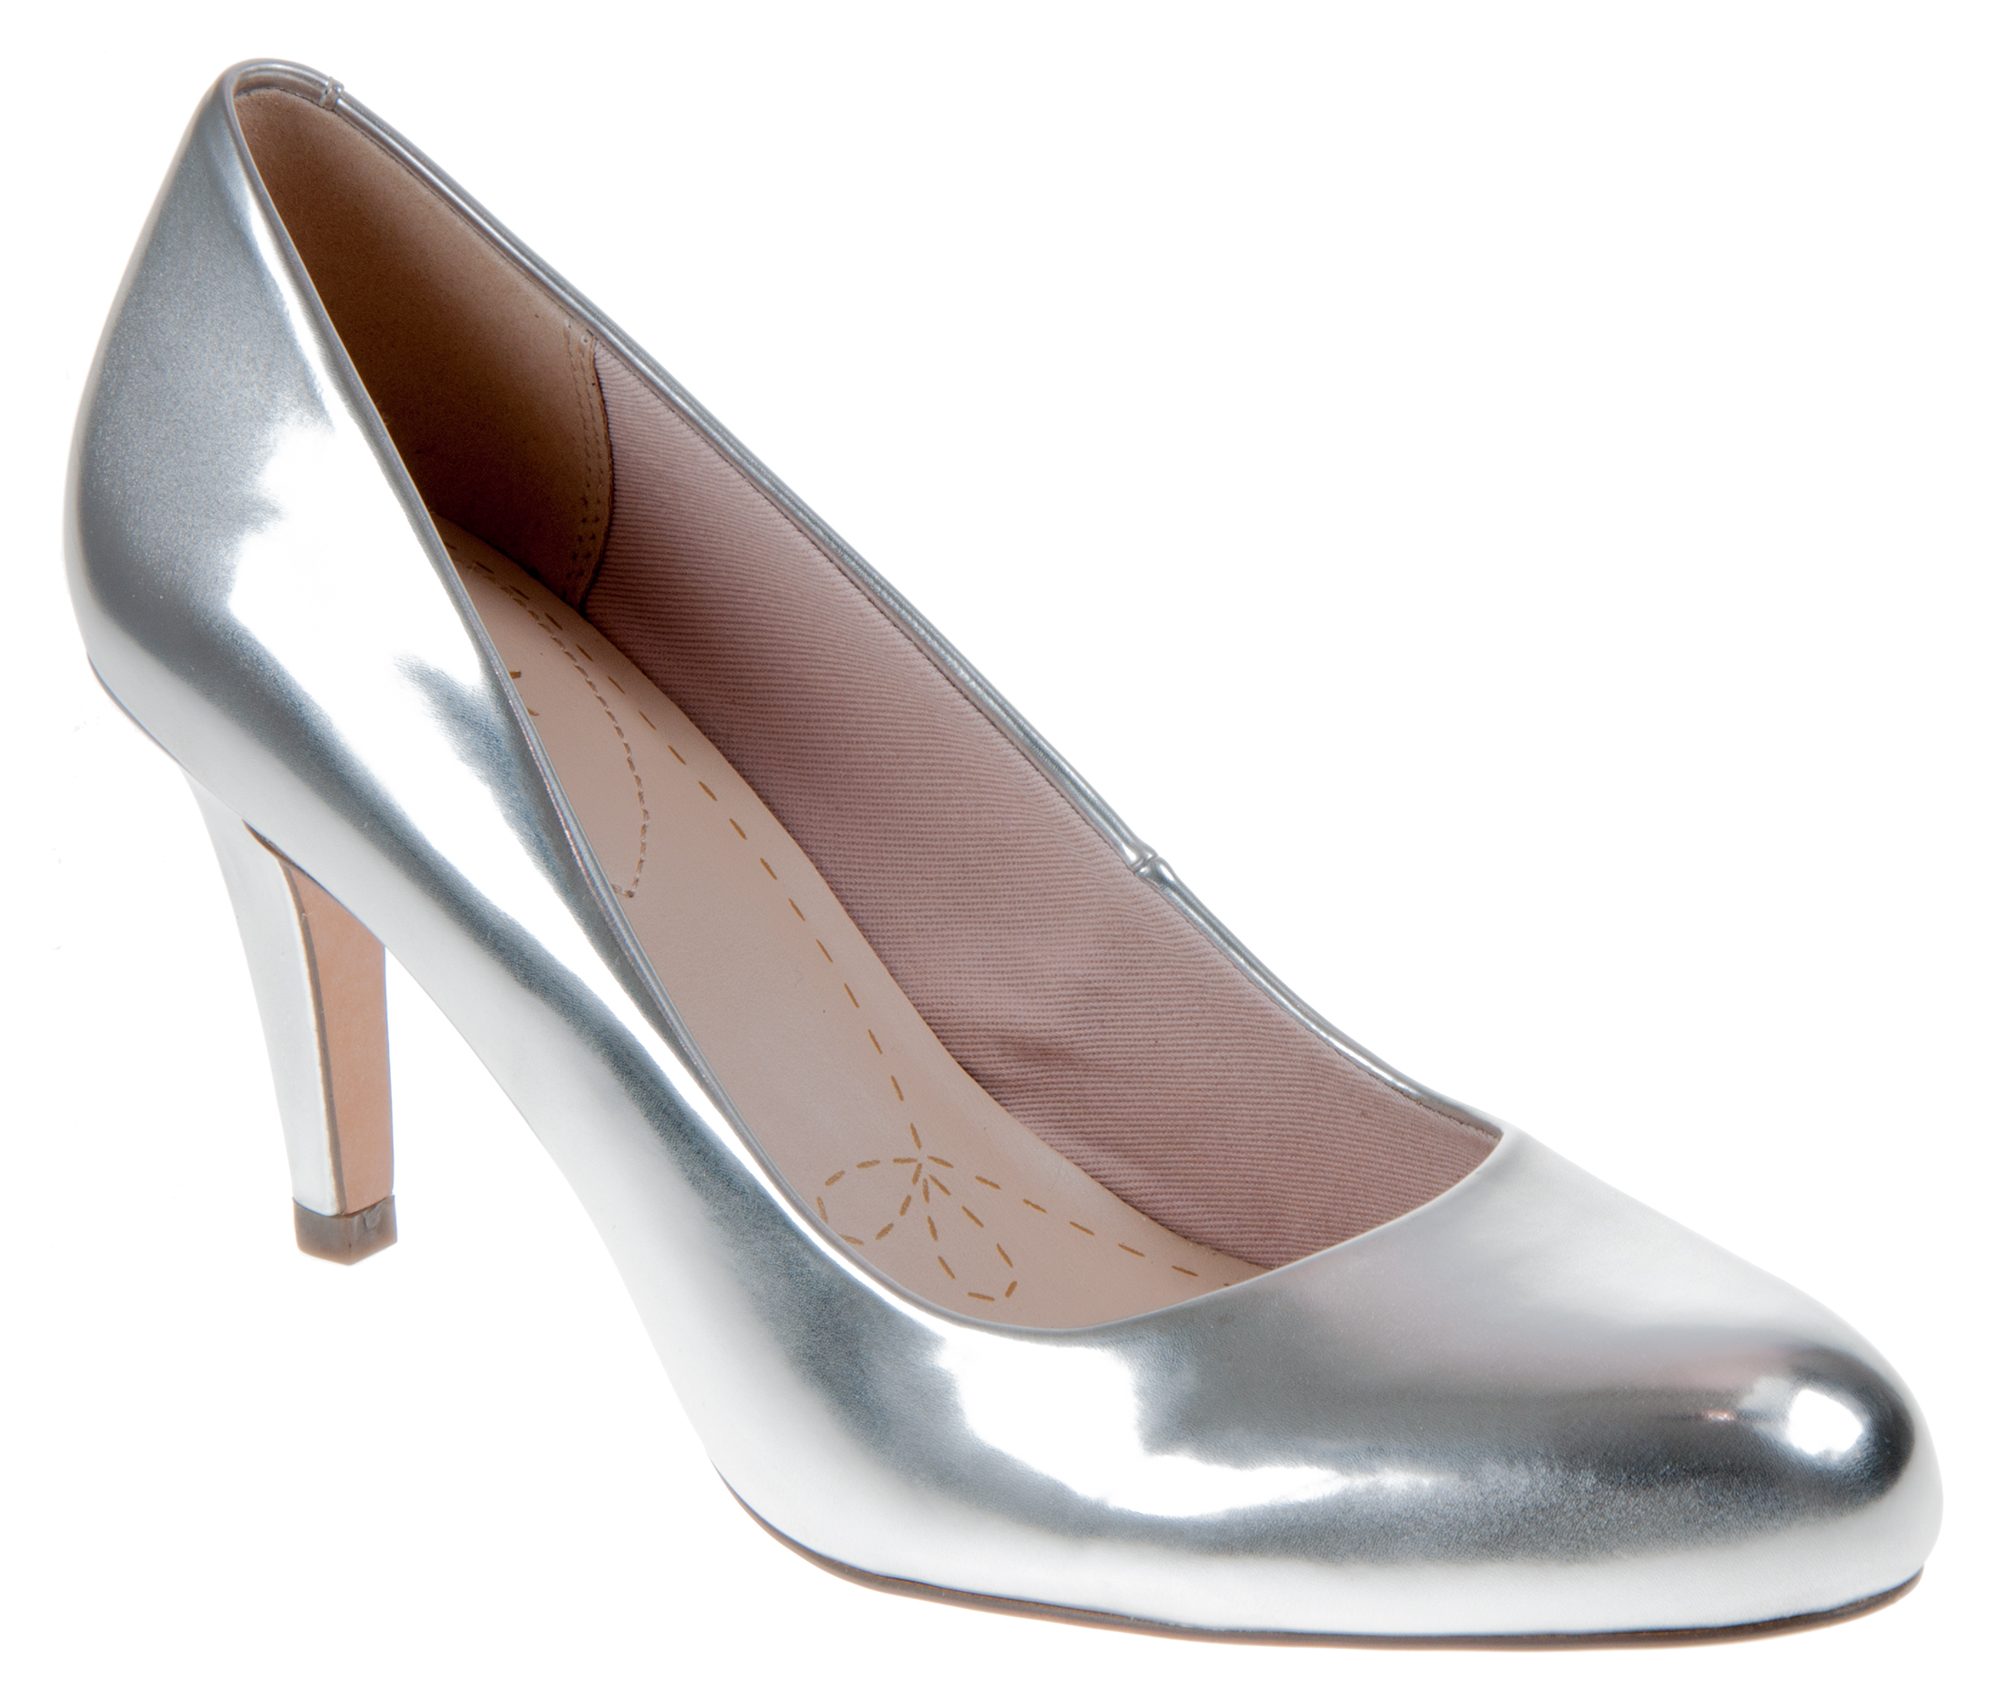 clarks silver court shoes